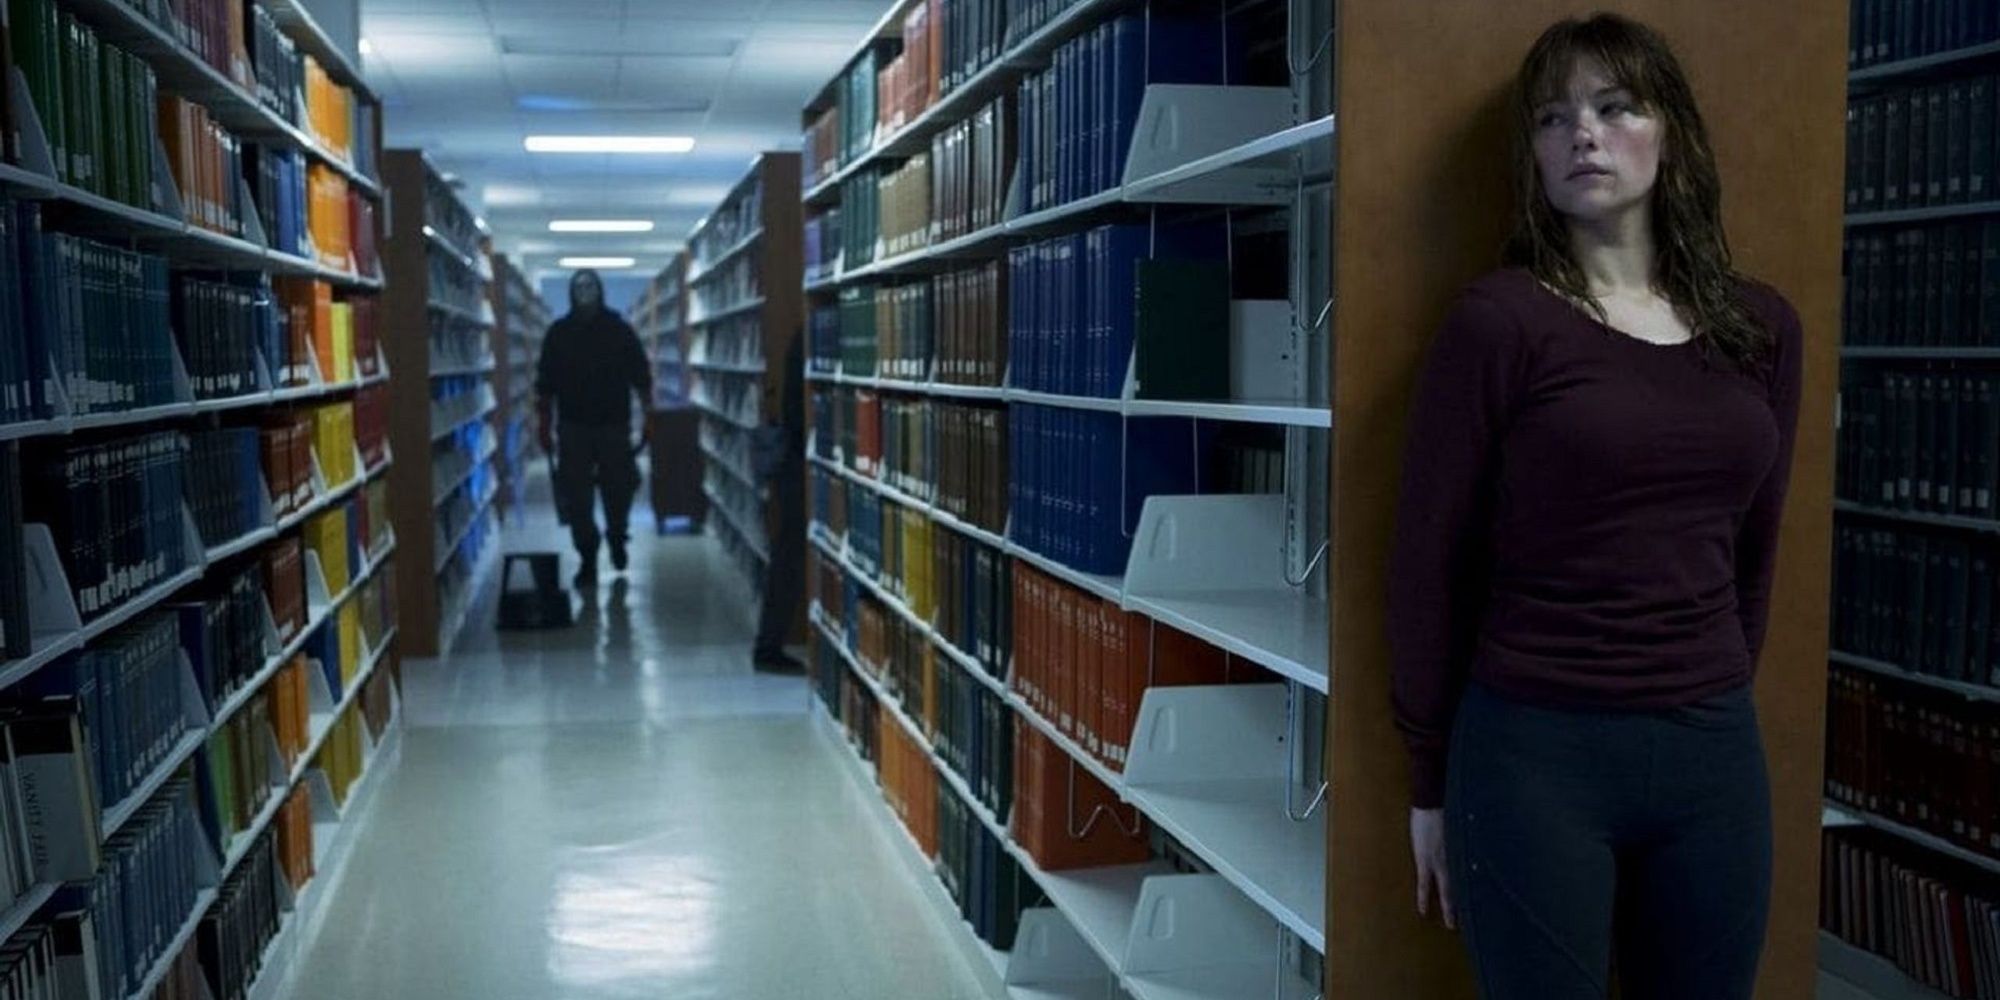 Justin is being hunted by a cultist killer in 'Christy's' library.